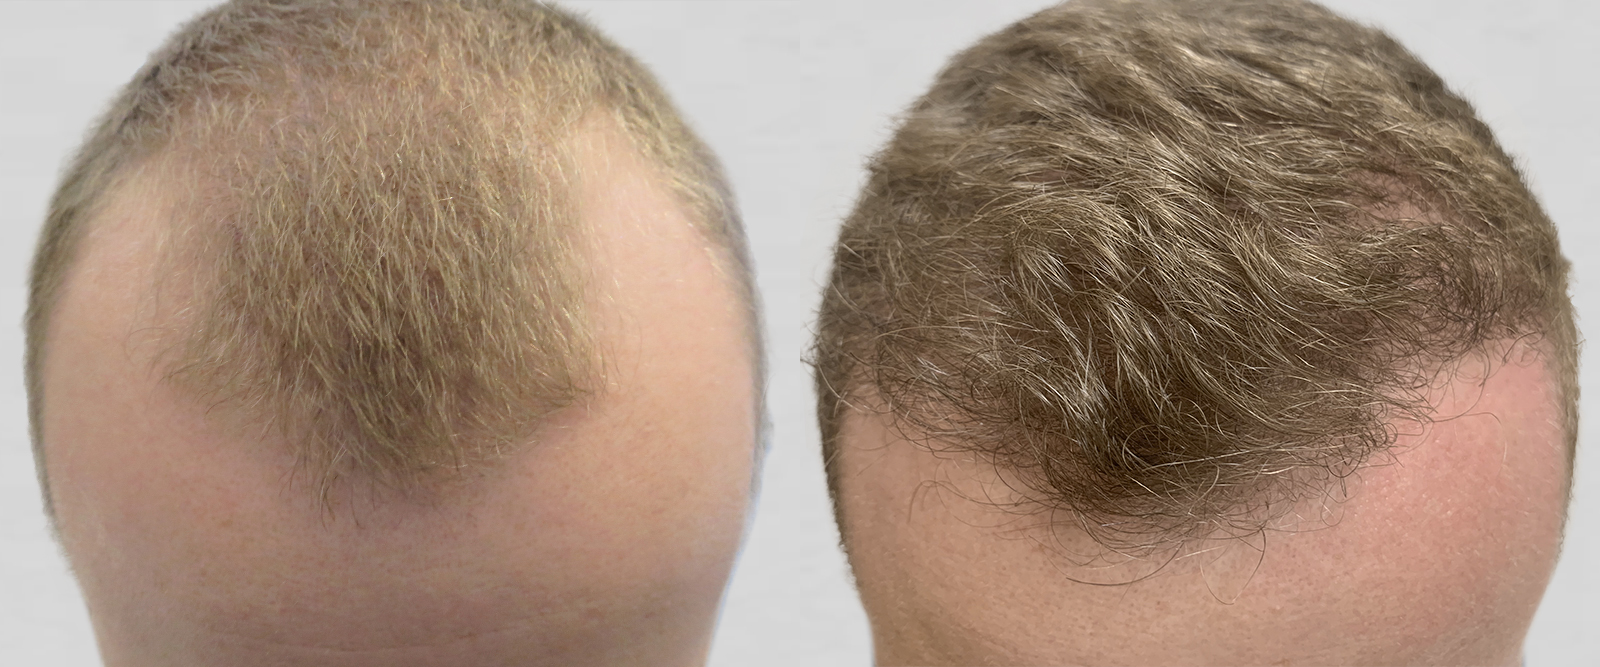 .. (Suction Assisted Follicular Extraction and Re-implantation) - a  minimally invasive hair transplant technique